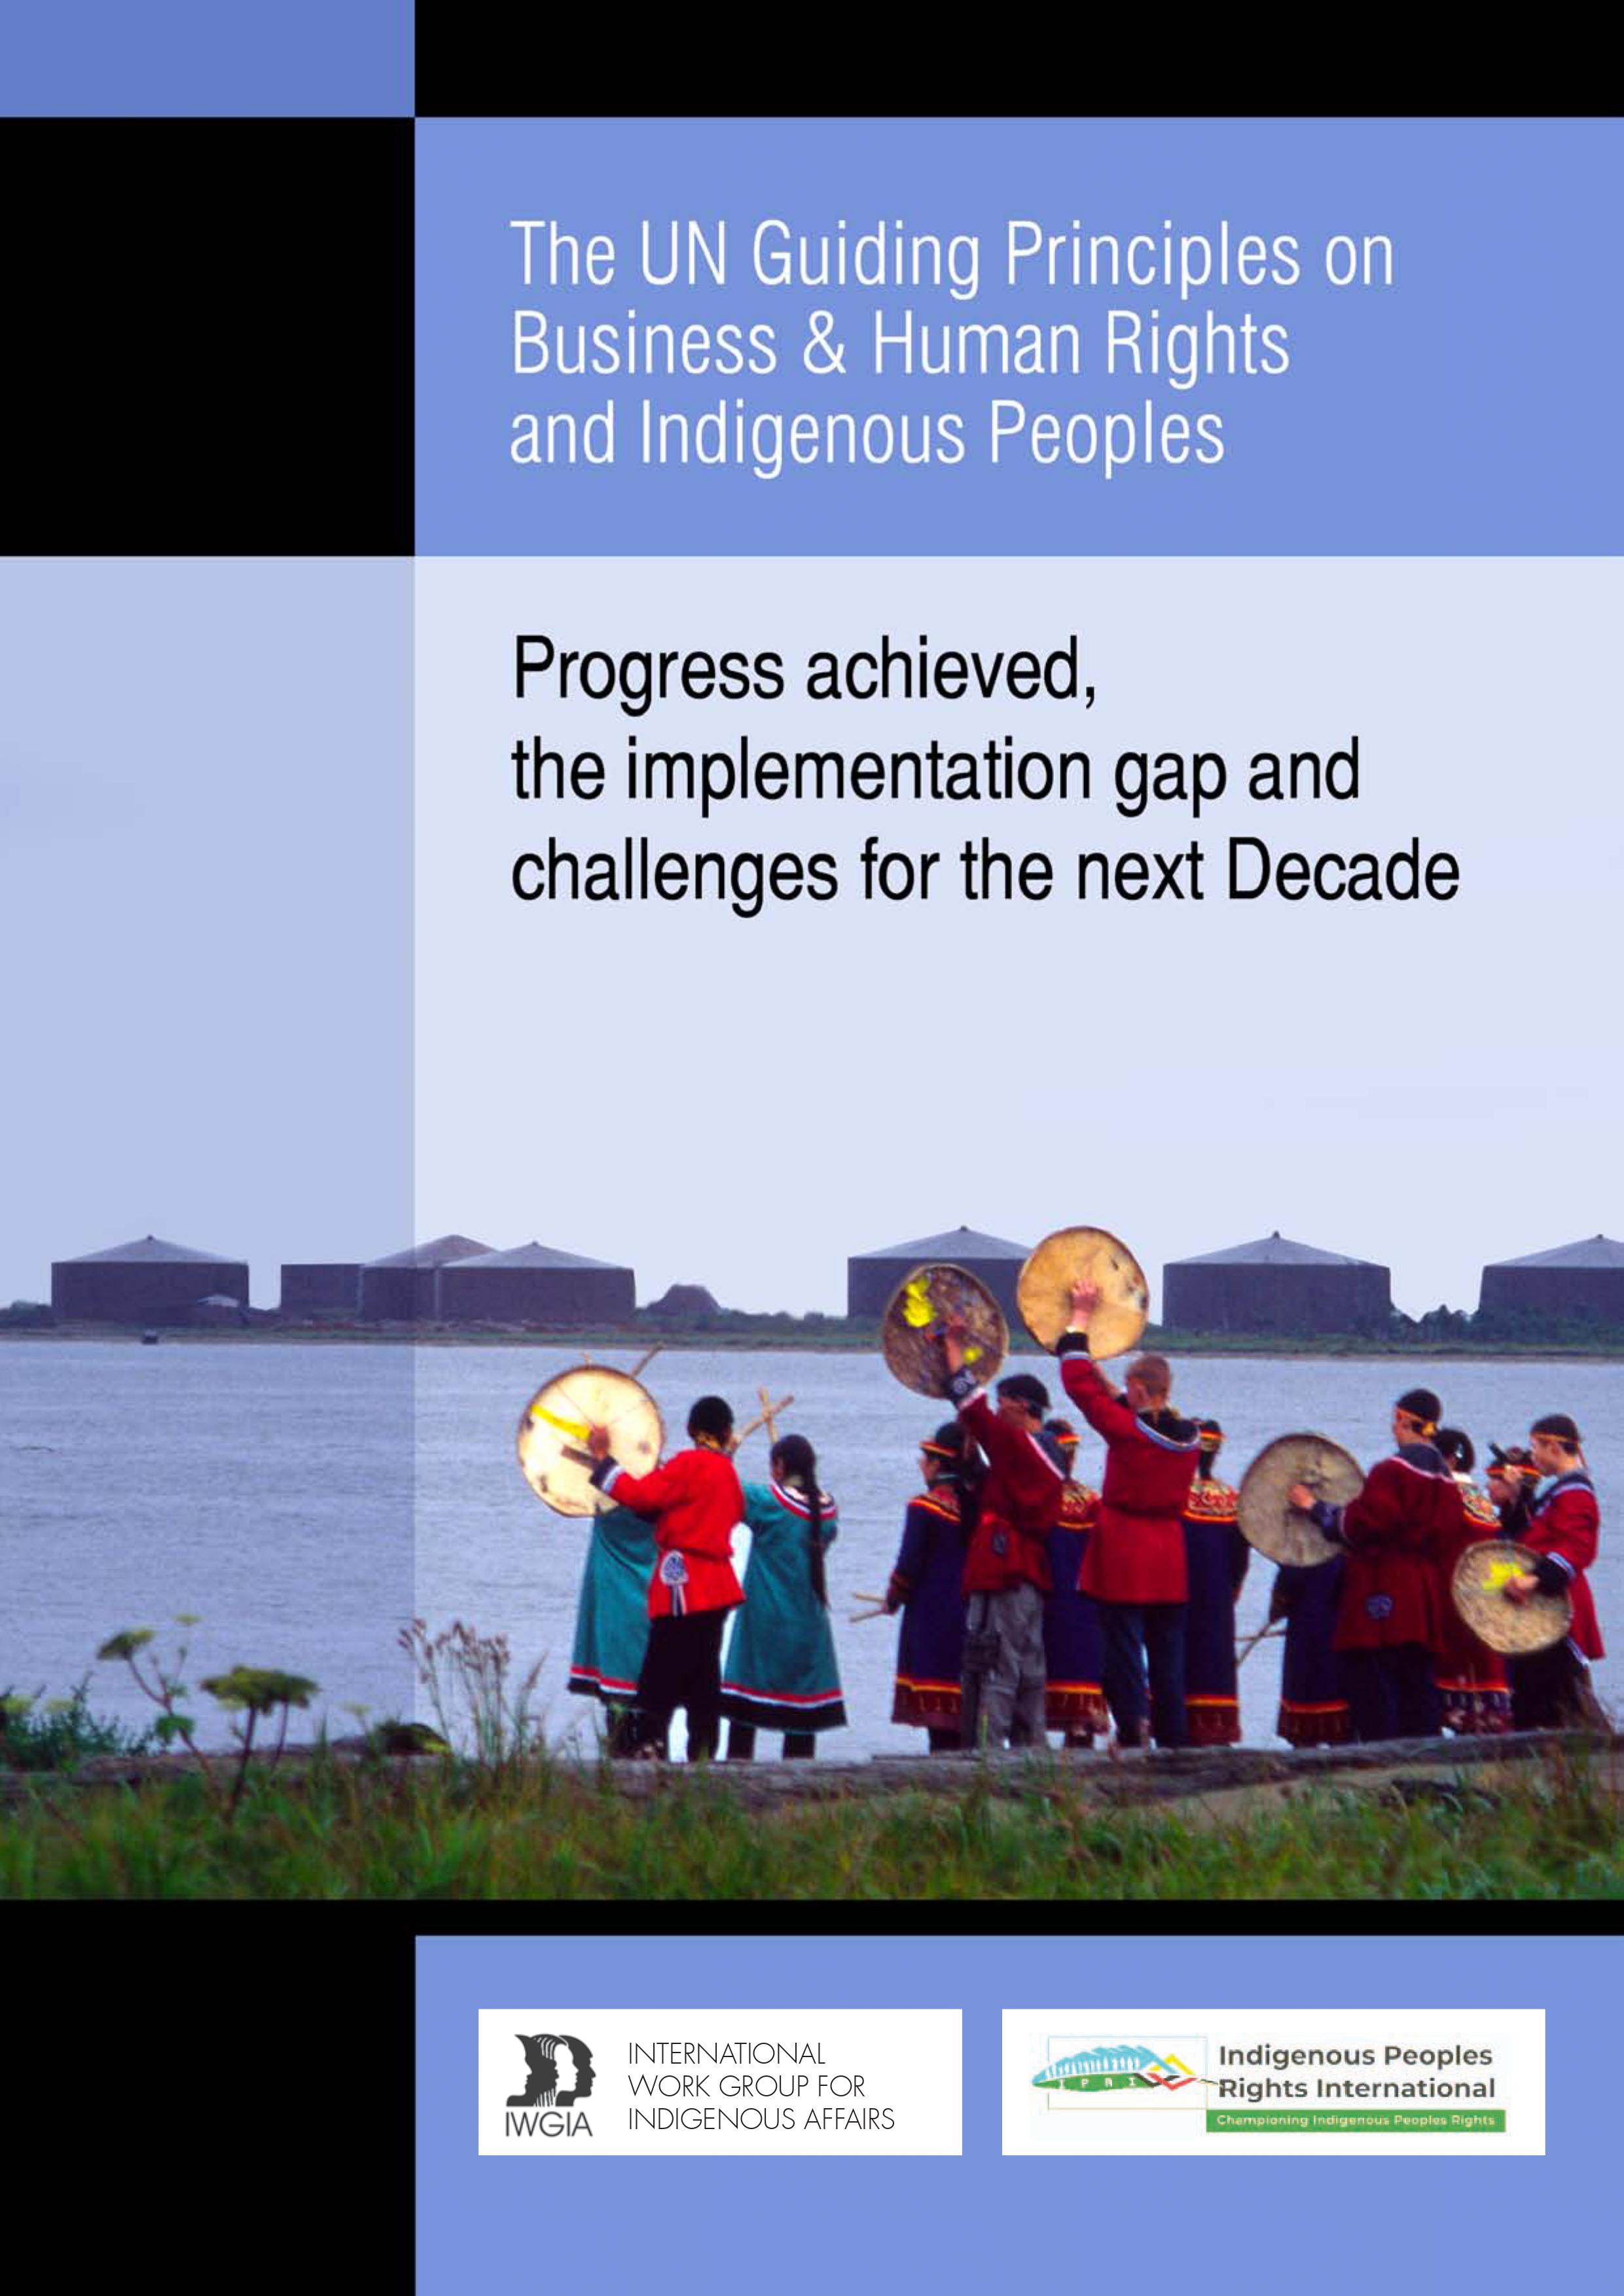 The UN Guiding Principles on Business & Human Rights and Indigenous Peoples